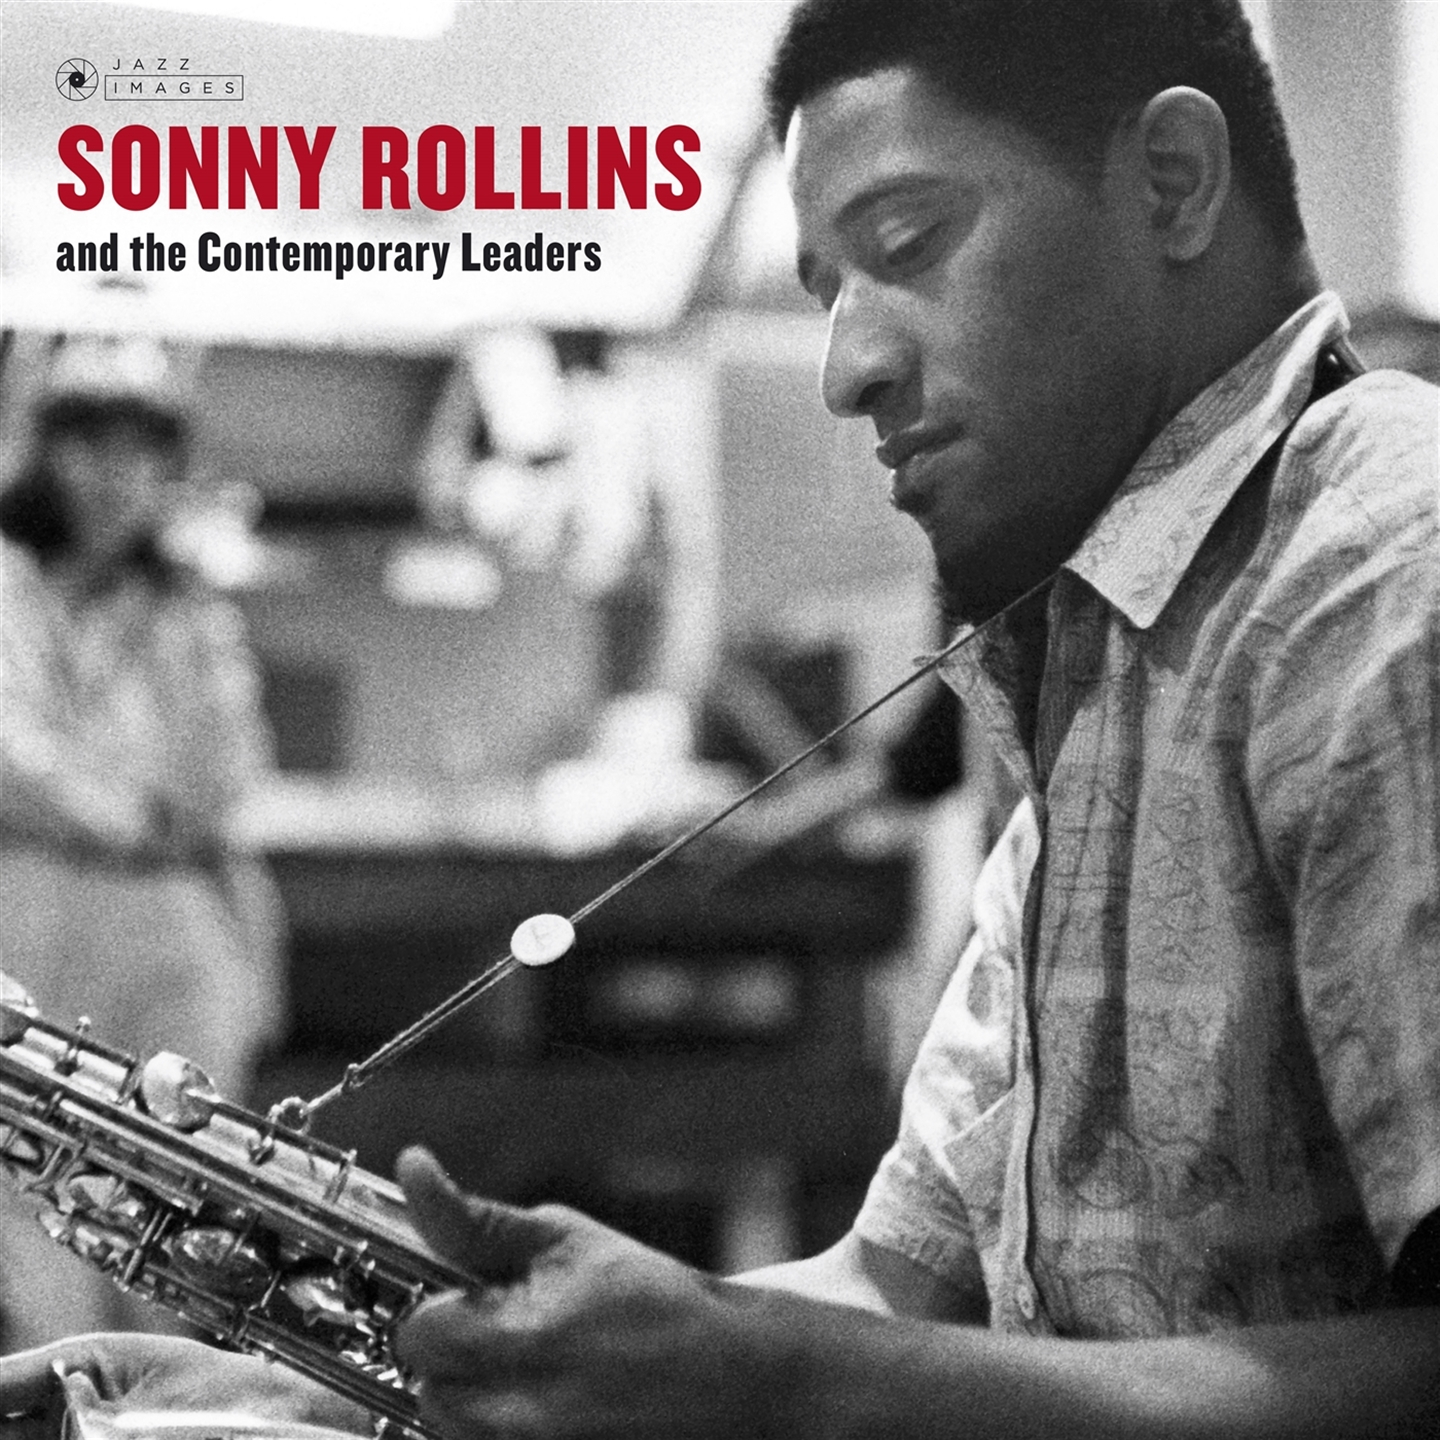 SONNY ROLLINS AND THE CONTEMPORARY LEADERS [GATEFOLD LP]